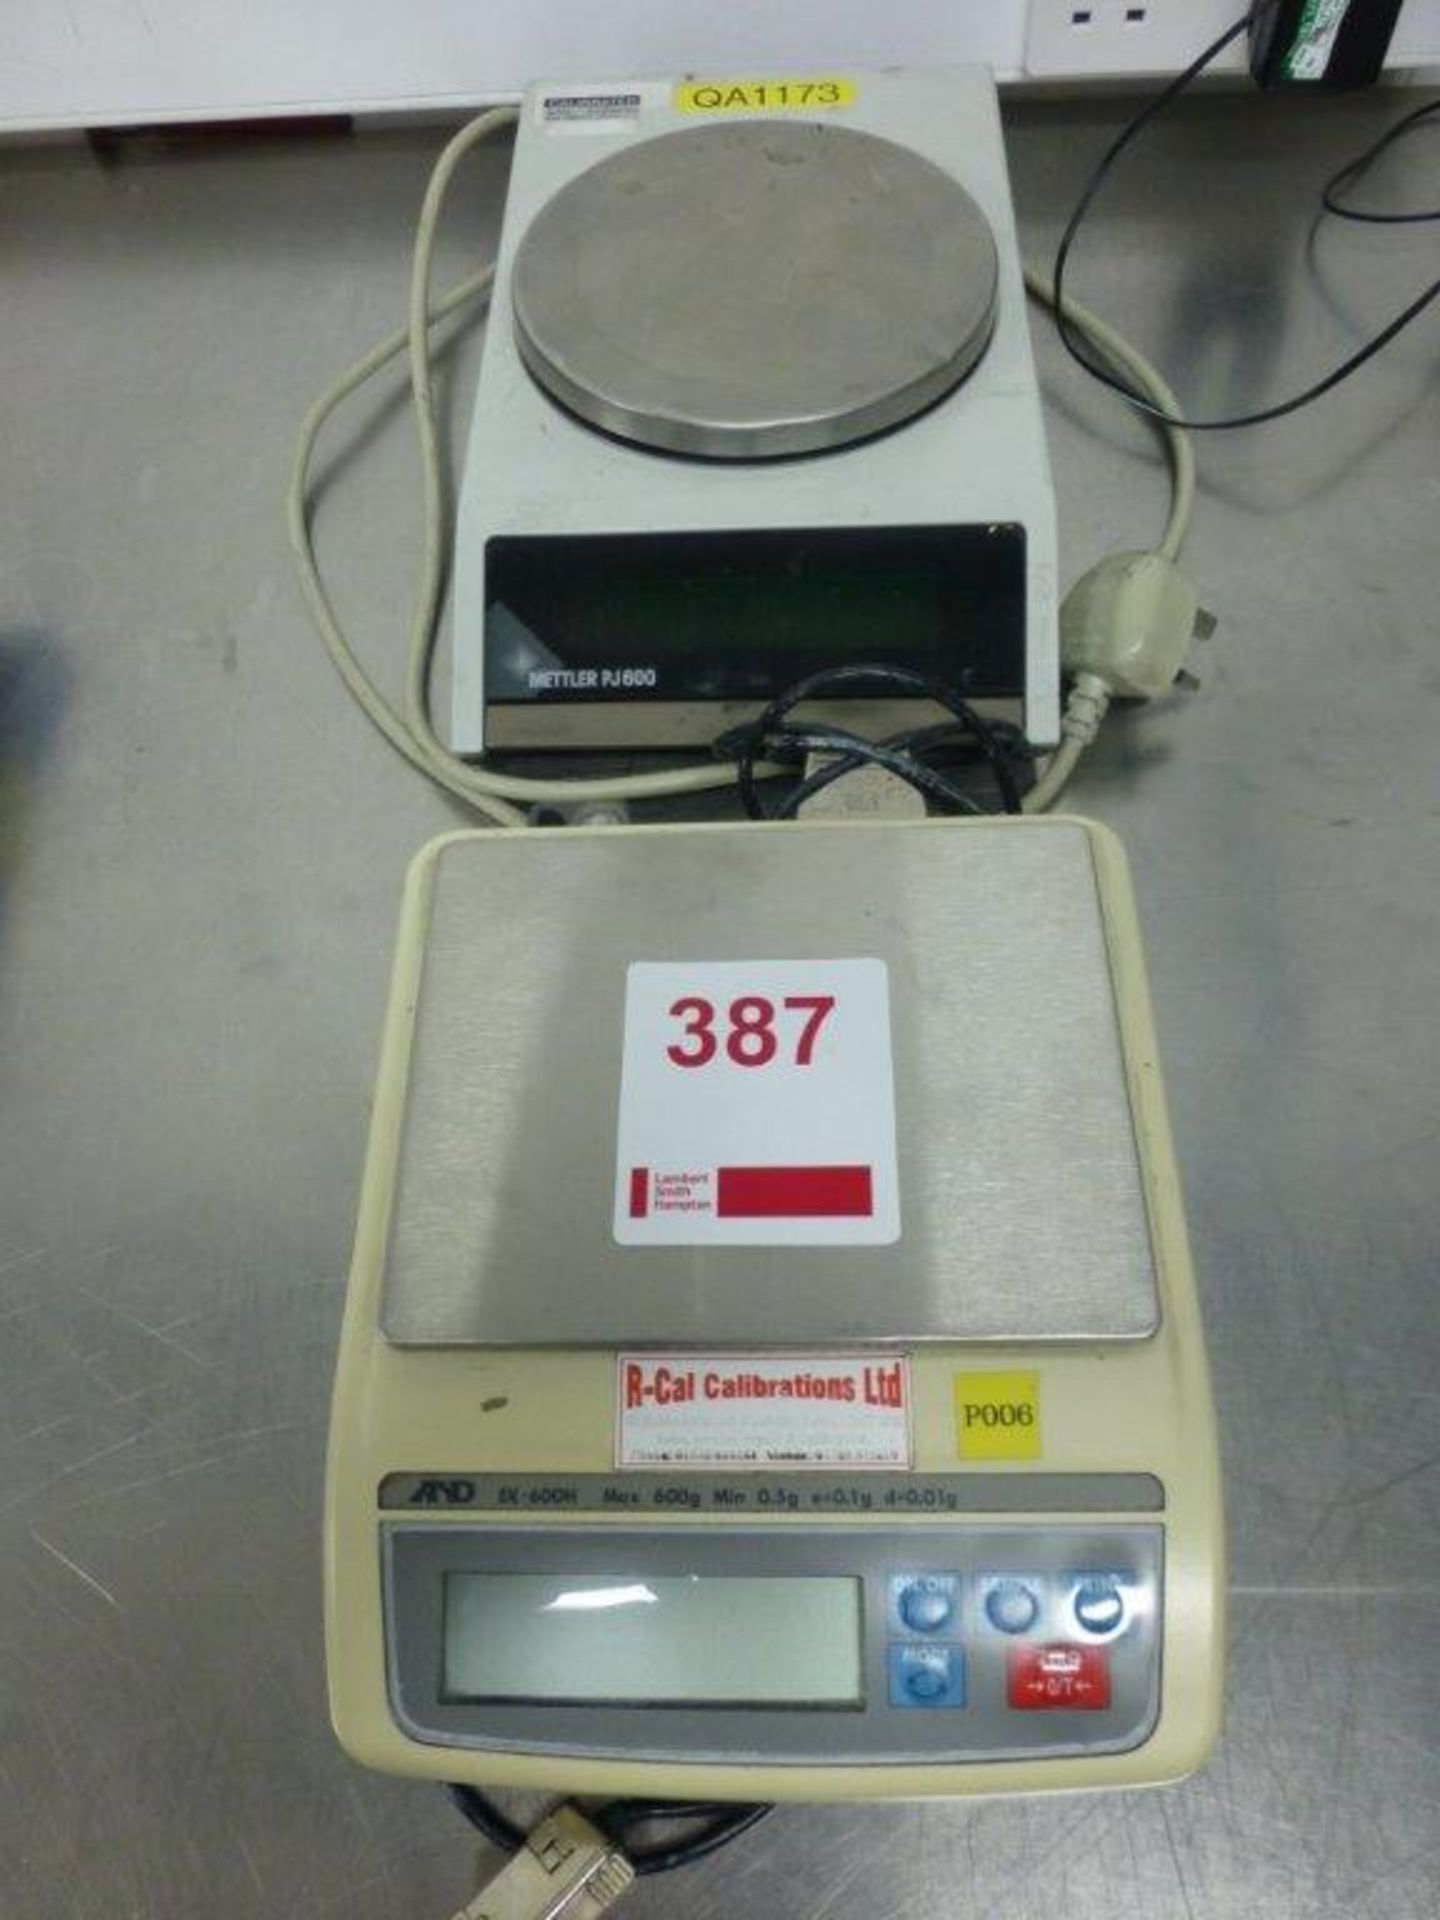 Mettler PJ600 600g benchtop digital scale with AND EK600H 600g benchtop digital scale